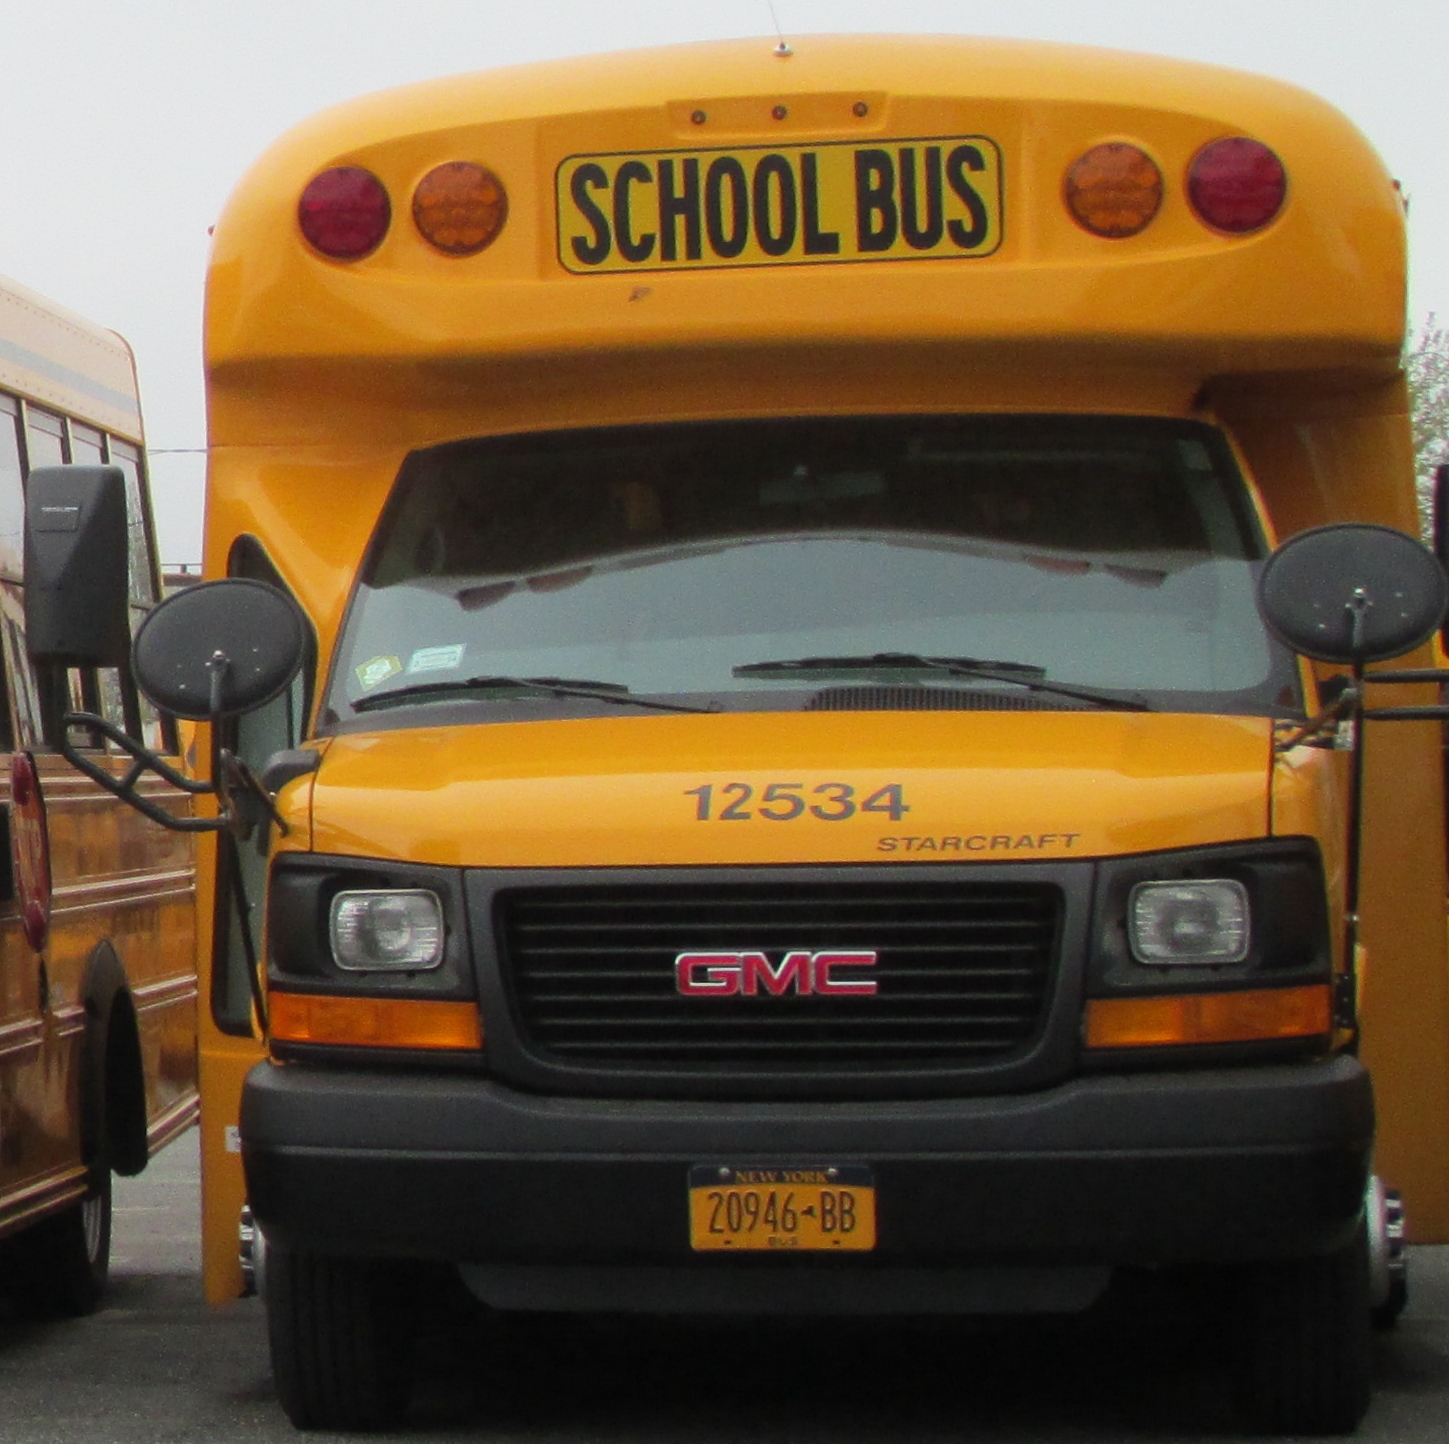 an image of two school buses that are parked